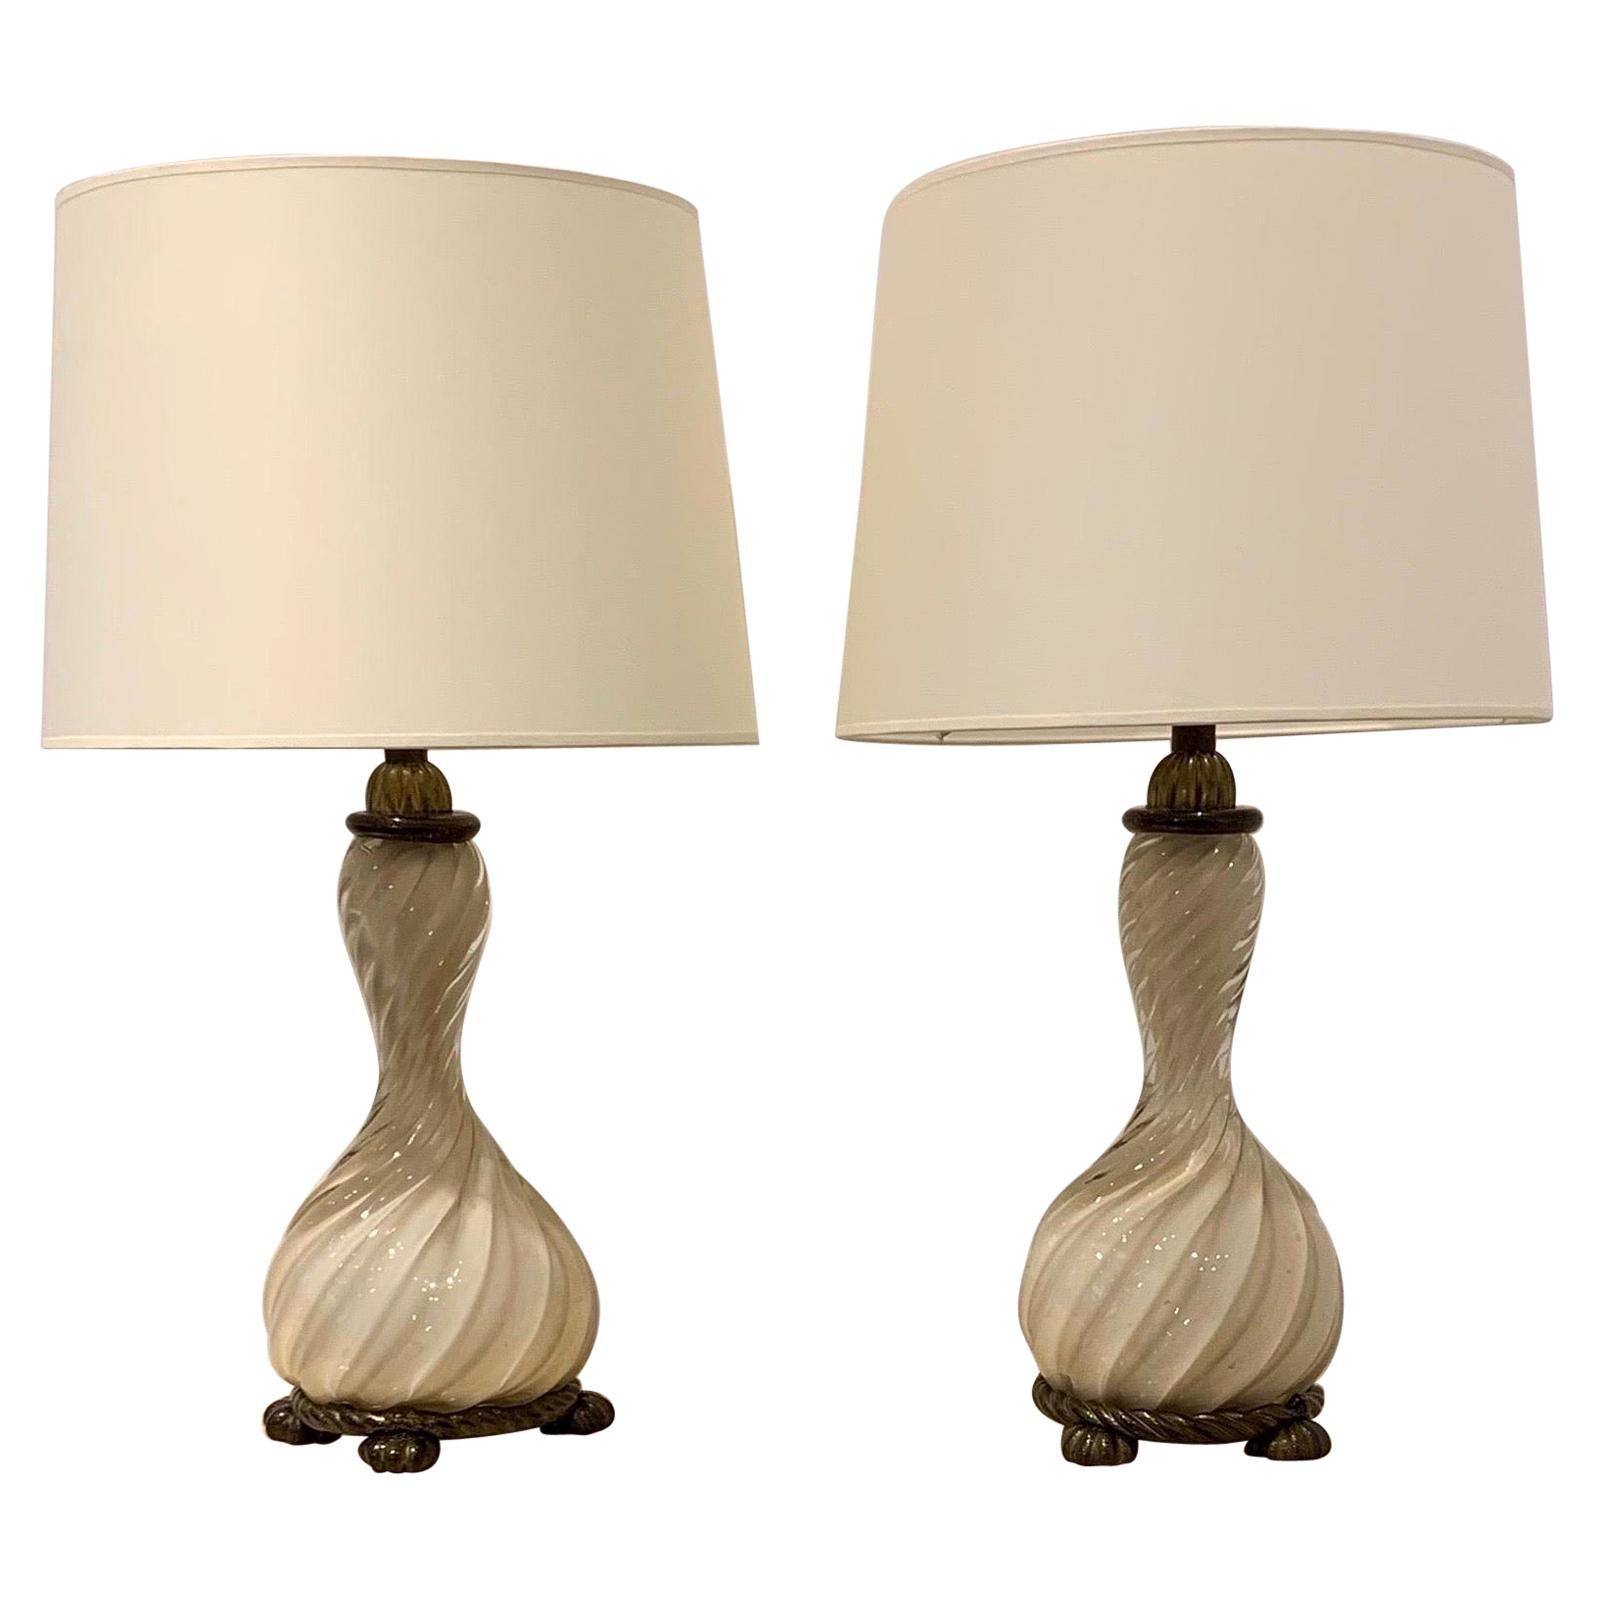 Pair of Barovier Table Lamps, 1940s